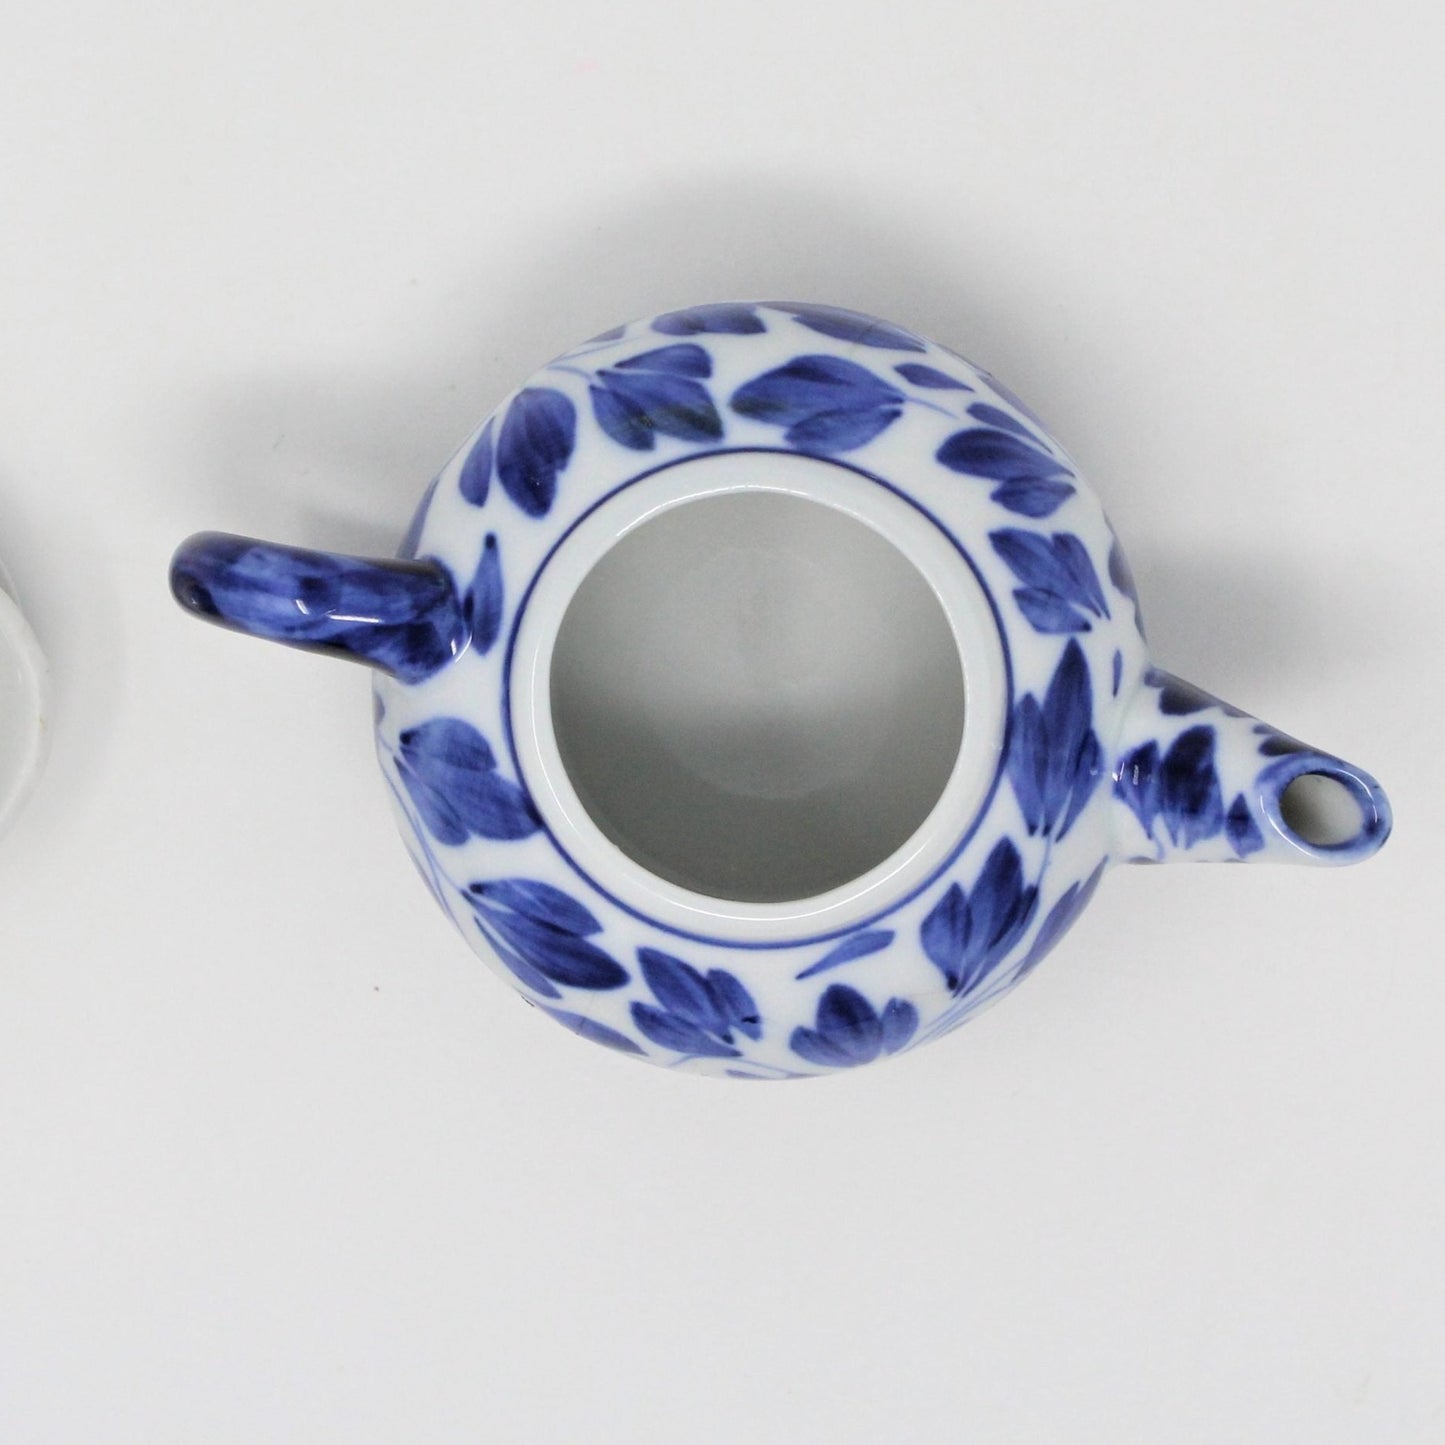 Mini Teapot, Andrea by Sadek Blue and White Leaves, Collectibles, Vintage